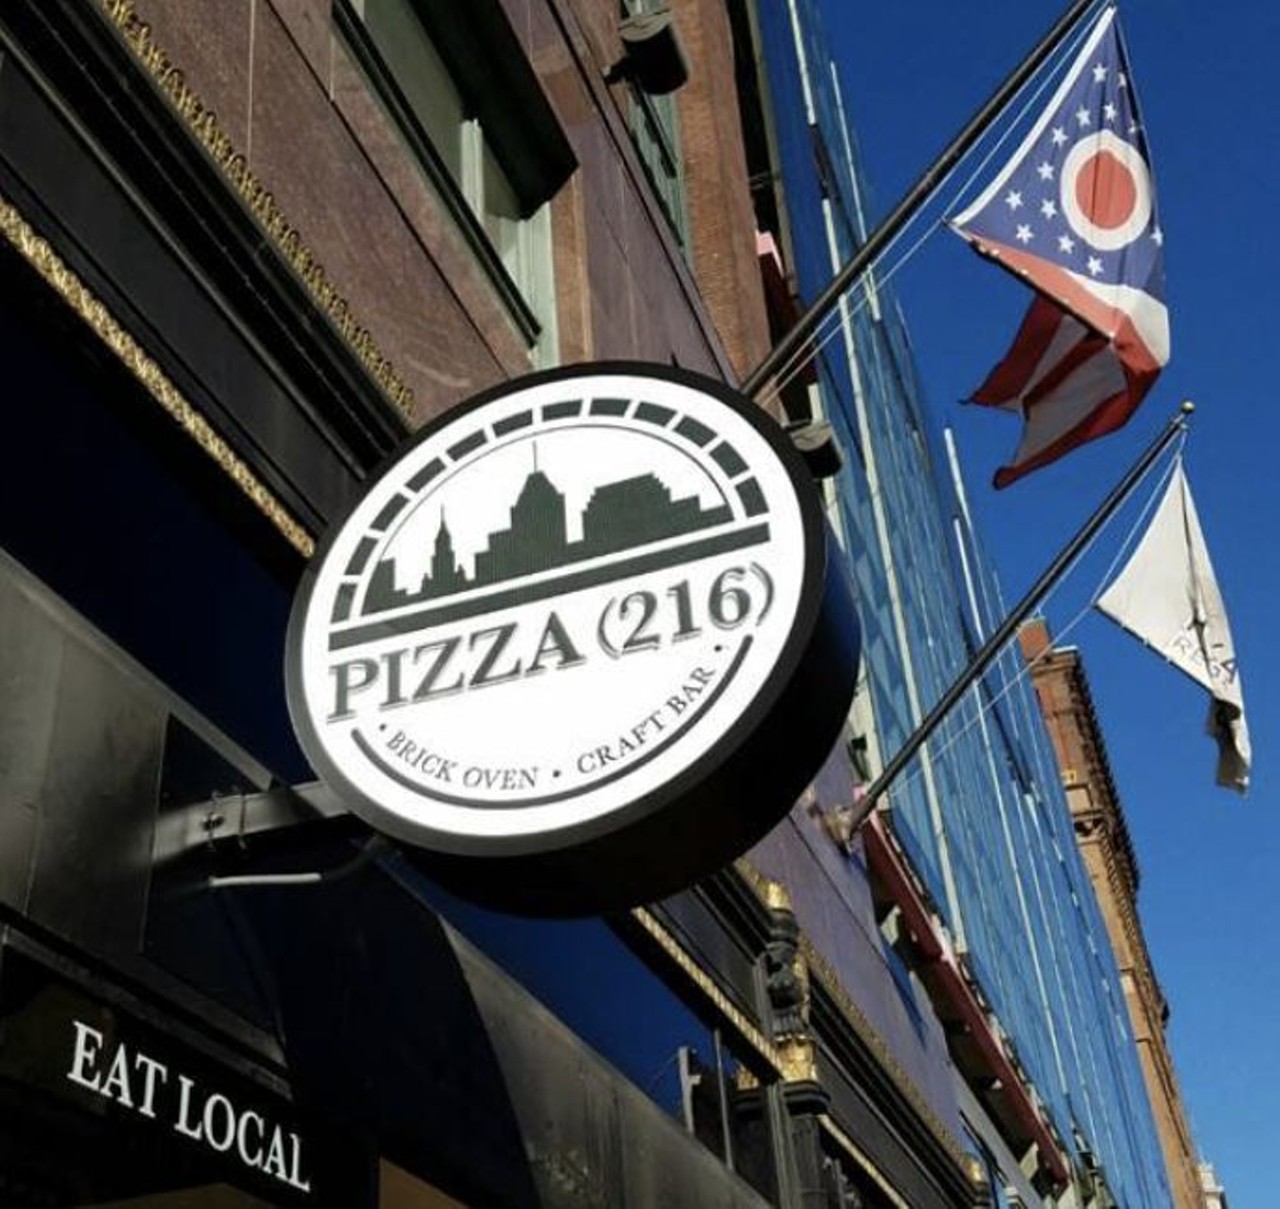  Pizza 216
401 Euclid Ave., Cleveland 
This locally-sourced pizza place has some of the freshest ingredients around and makes for a perfect lunch pie. All of their signature pies are either $9 or $9.50.
Photo via @Pizza216/Instagram